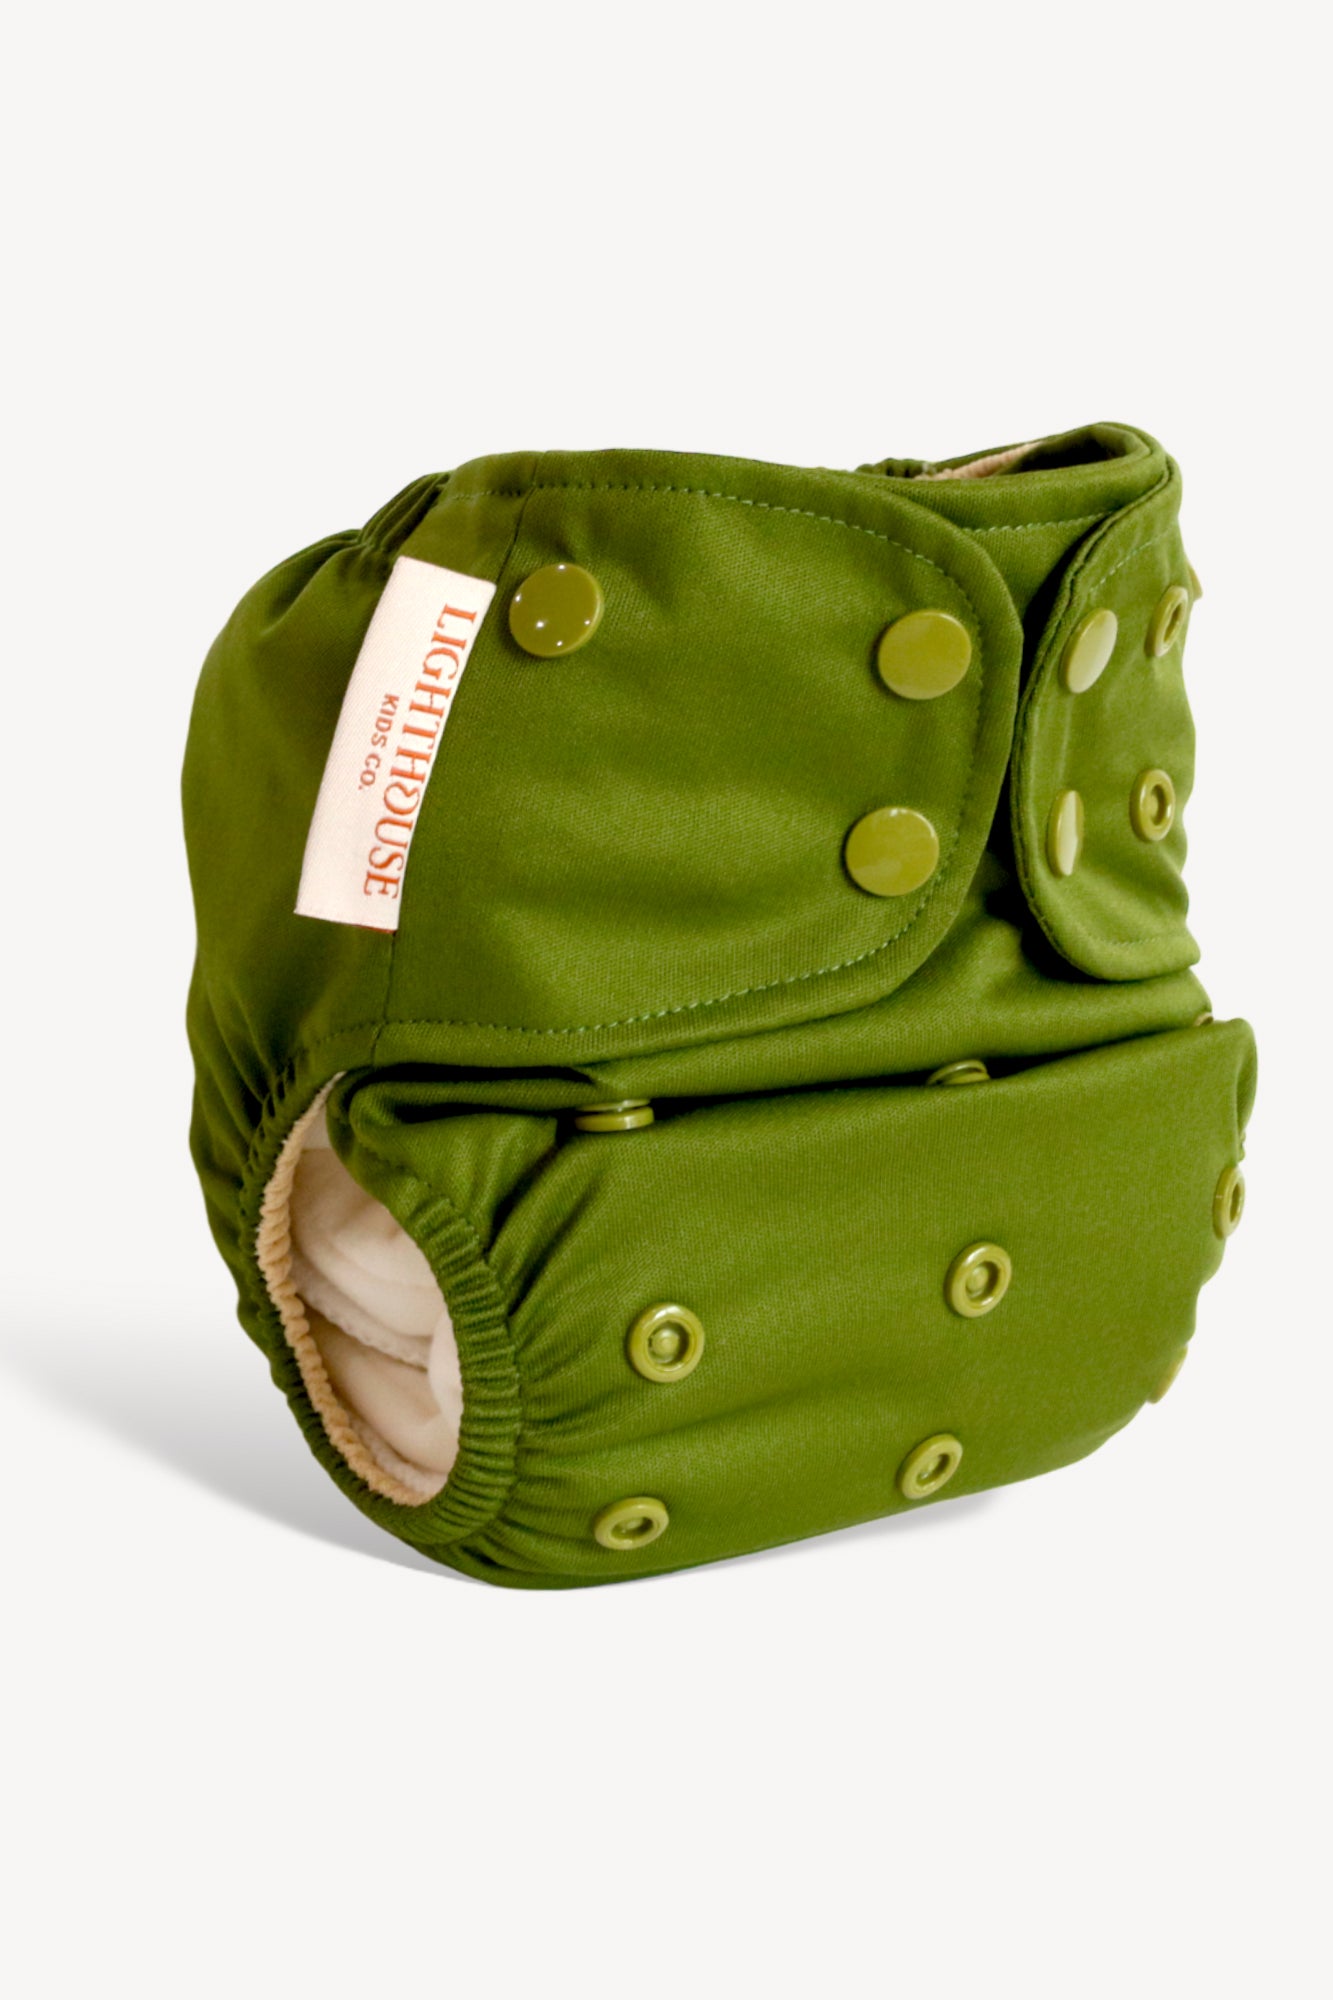 All-In-One Cloth Diaper - Forest